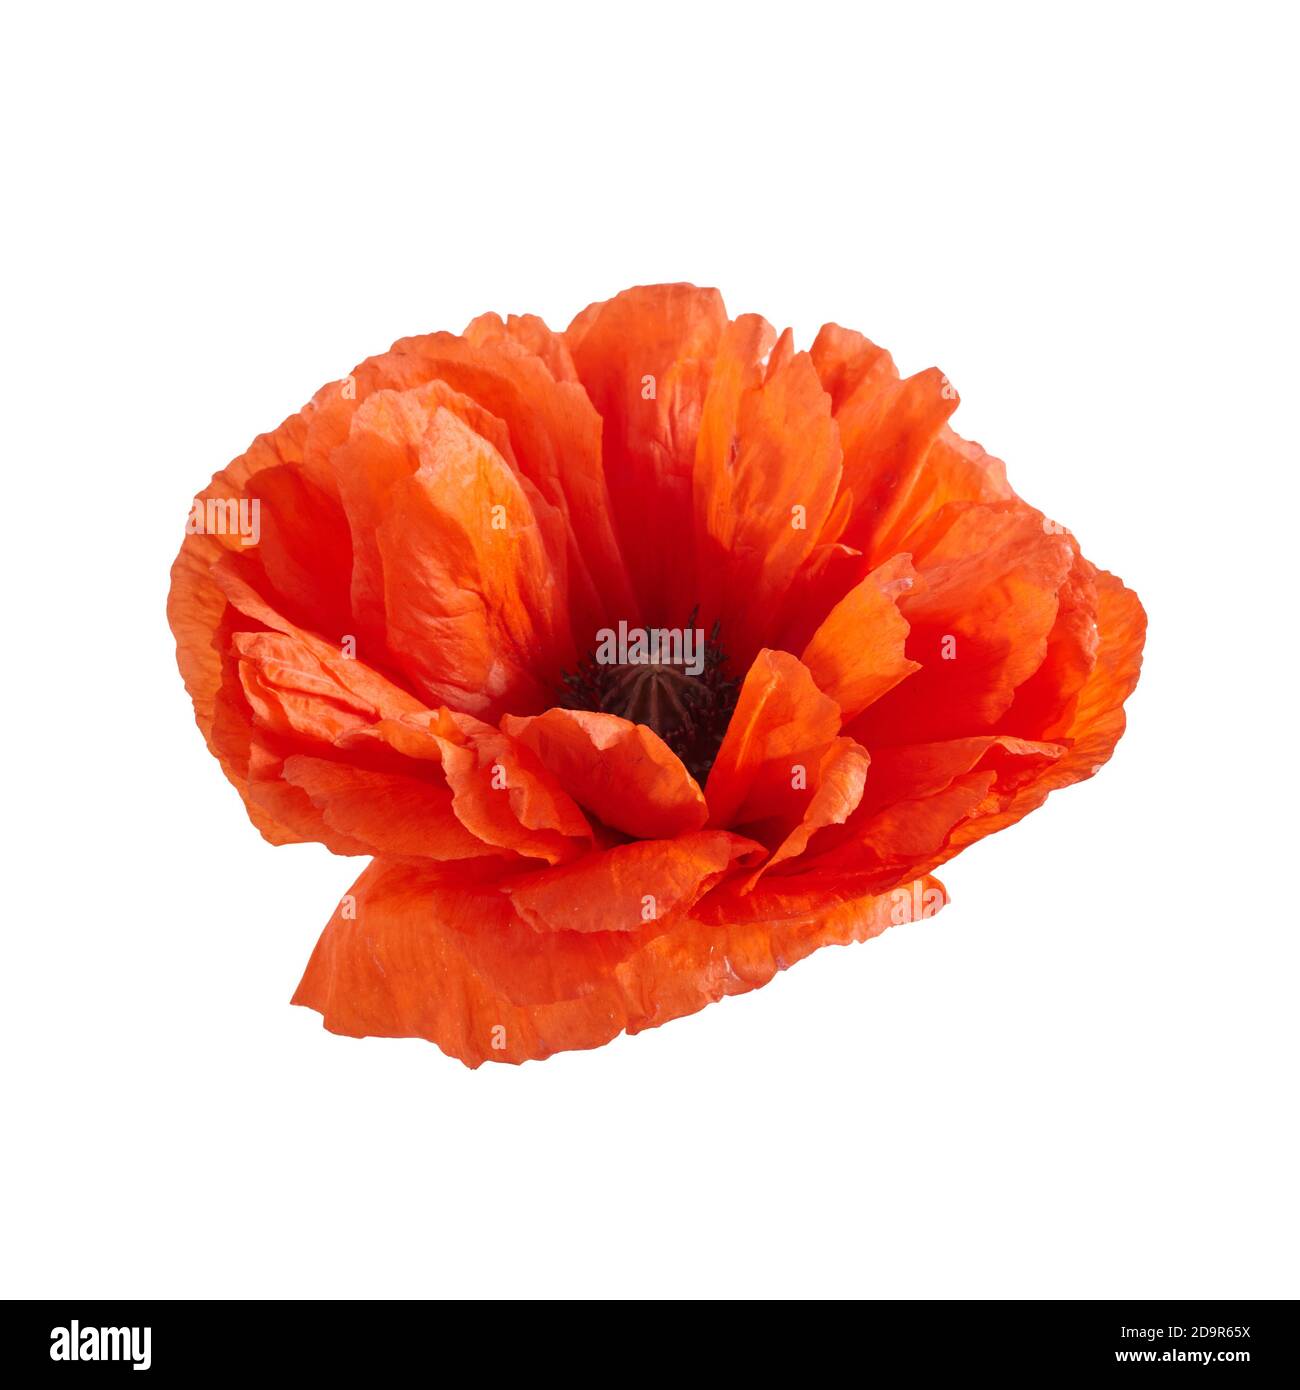 Poppy flower isolated on white background. Remembrance day. Stock Photo